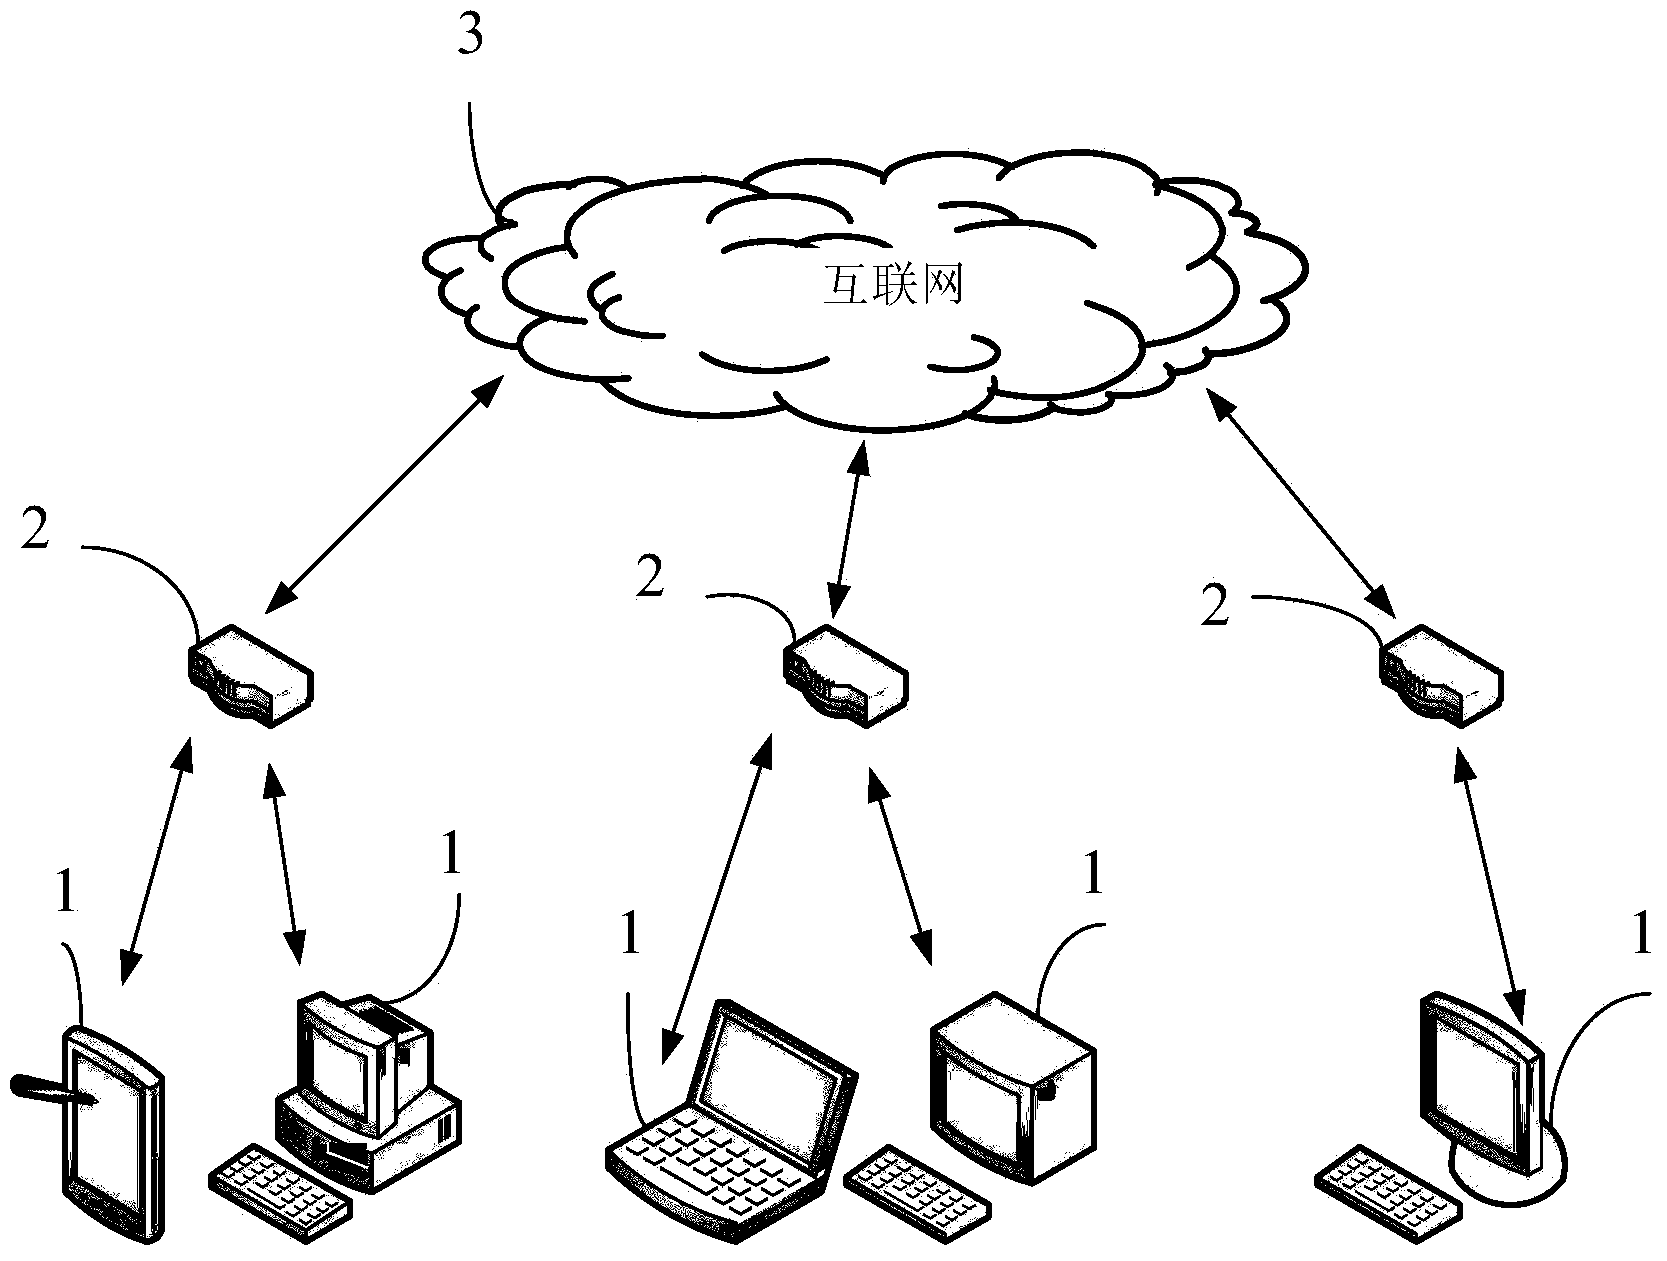 Malicious website prompt method and router